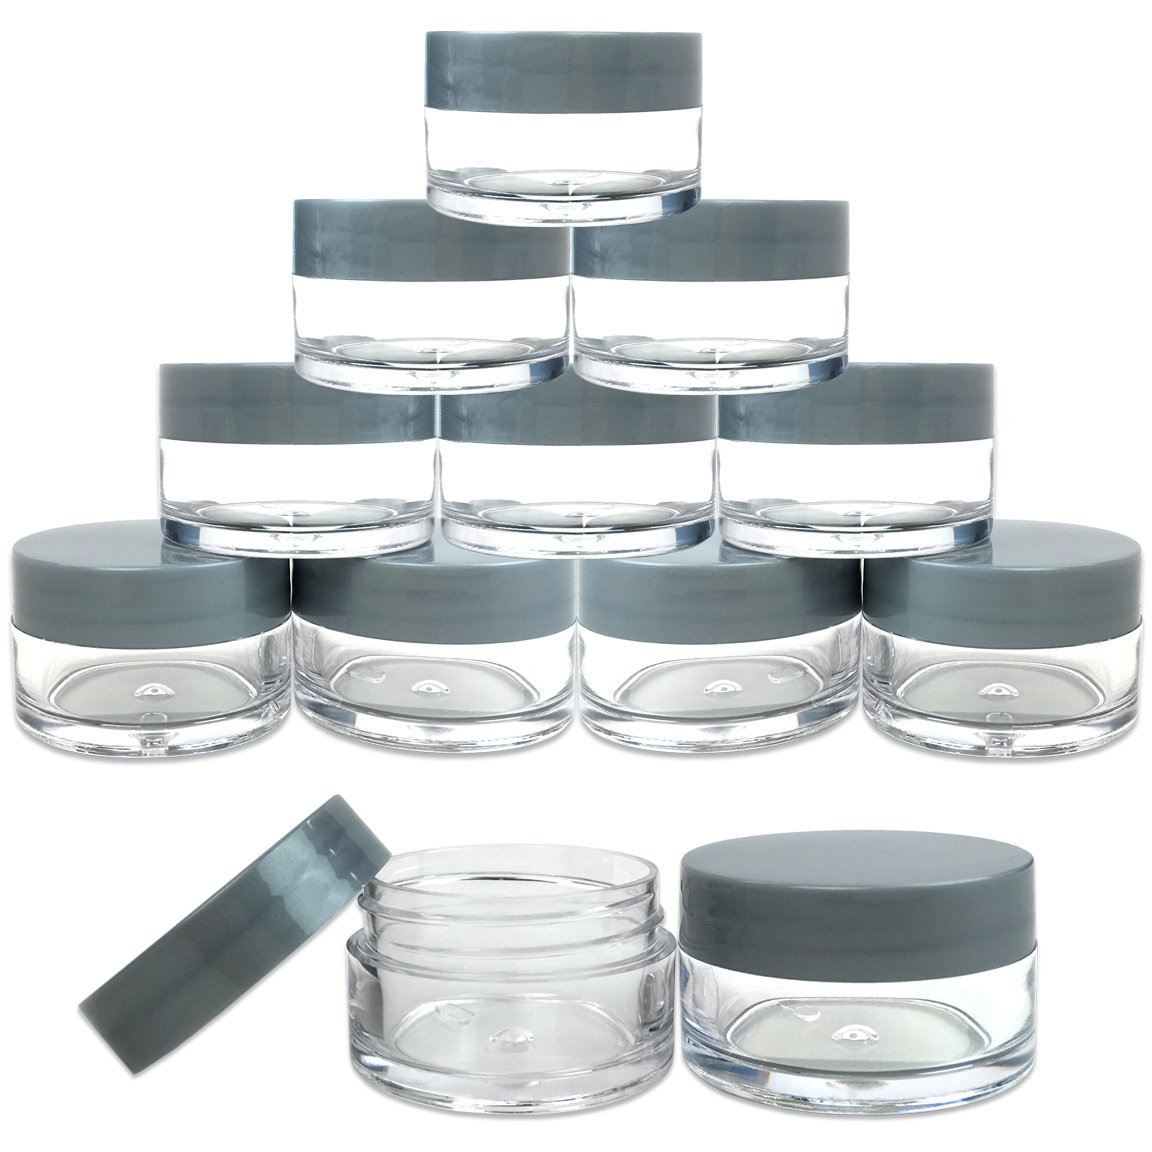 Beauticom 12 Pieces 20G/20ML Round Clear Jars with Gray Lids for Herbs, Spices, Loose Leaf Teas, Coffee and Other Foods - BPA Free